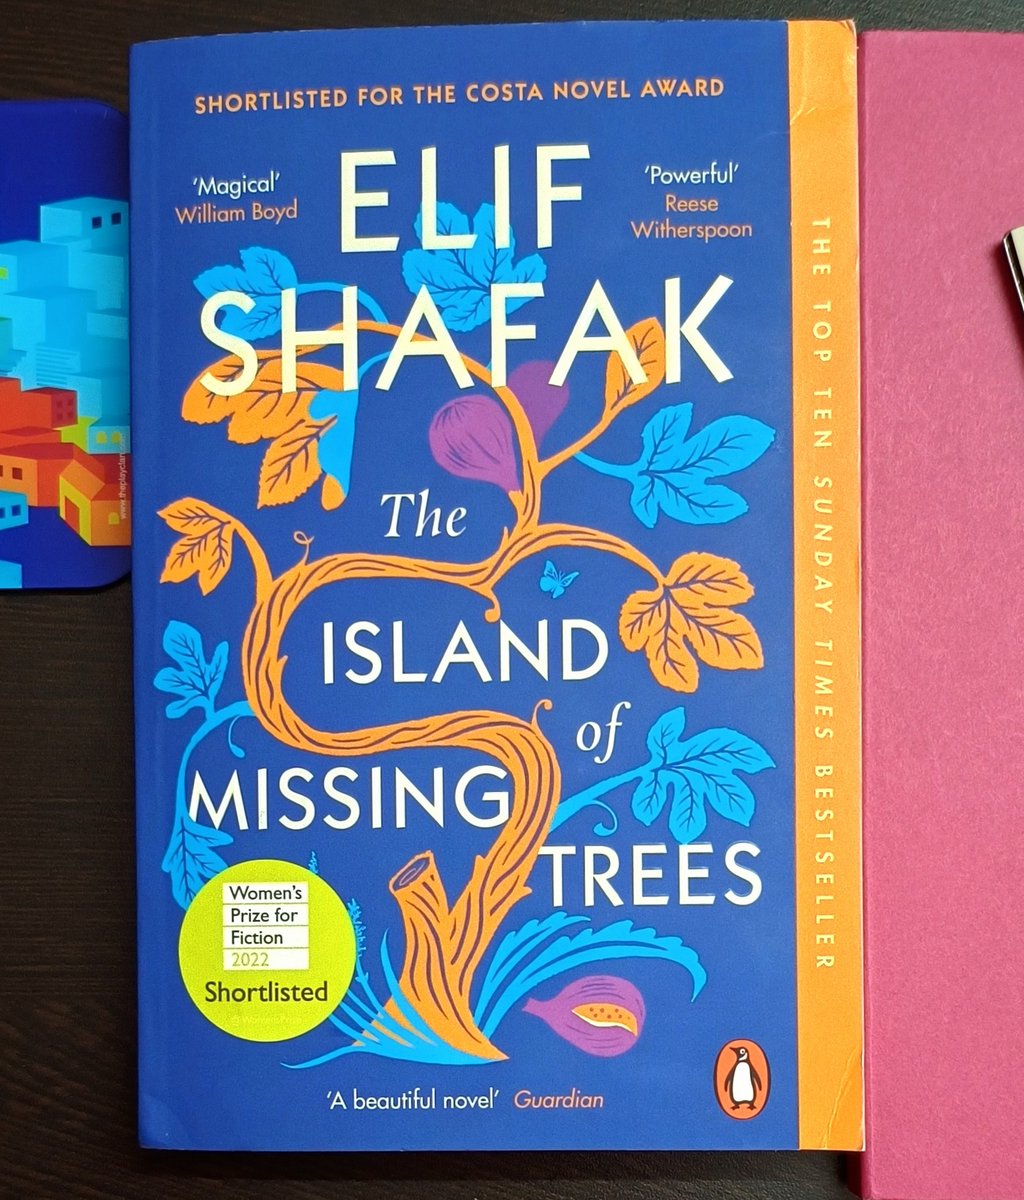 Book 3/'24 The Island of Missing Trees by Elif Shafak - A story of love and loss. A tree as a main character adds depth and dimension to the narrative, carrying it through.